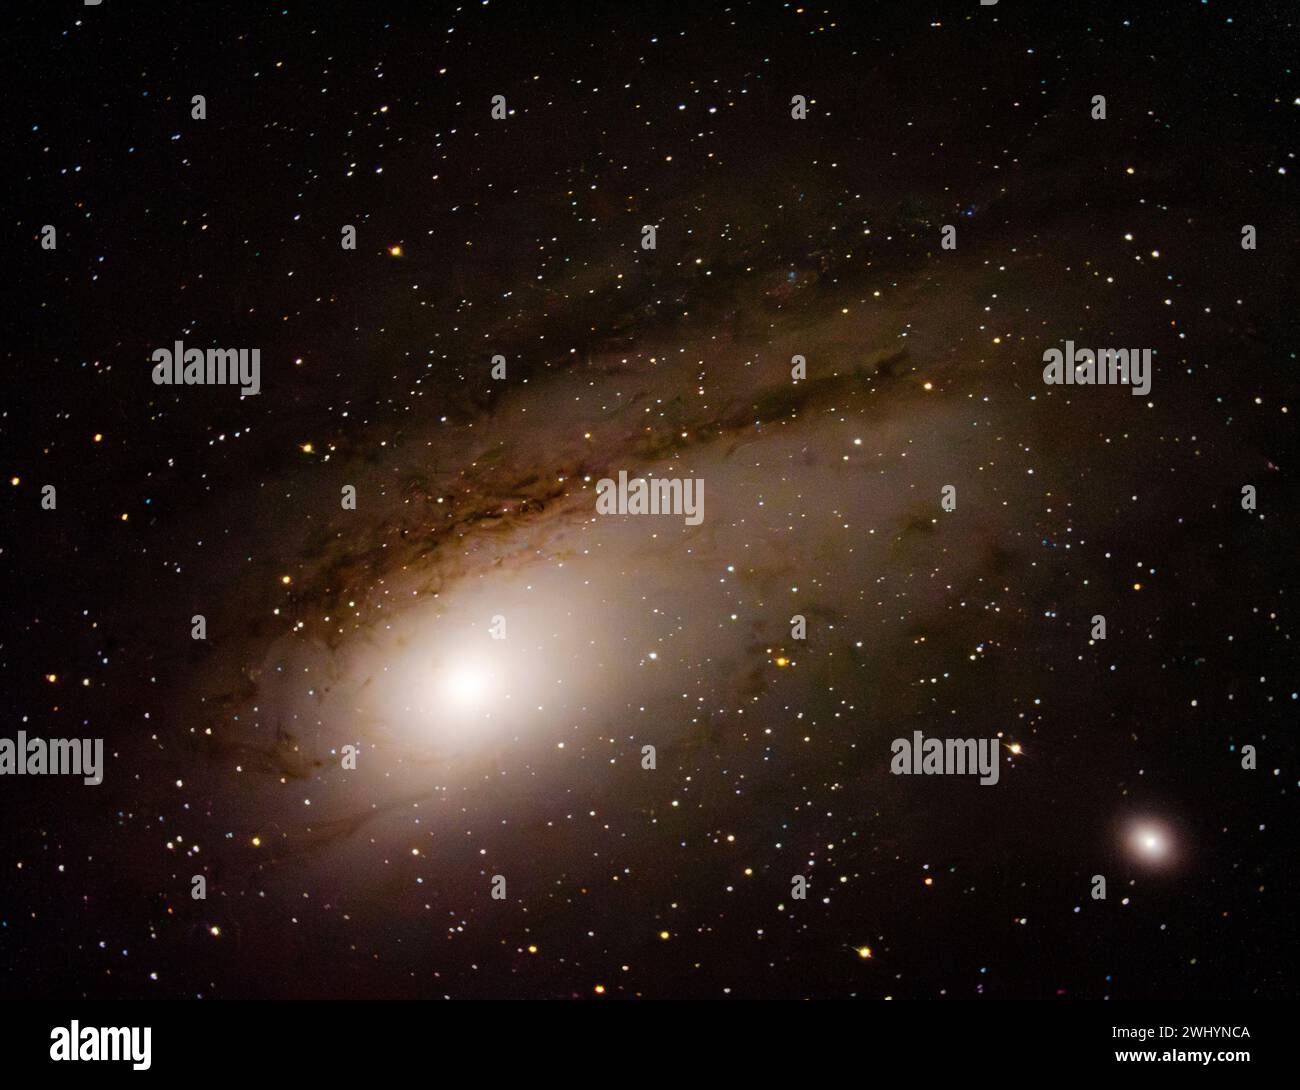 Astronomy, Photo, M31, Andromeda Galaxy, Galactic Cloud, Galactic Center, Celestial Object, Deep Space Stock Photo